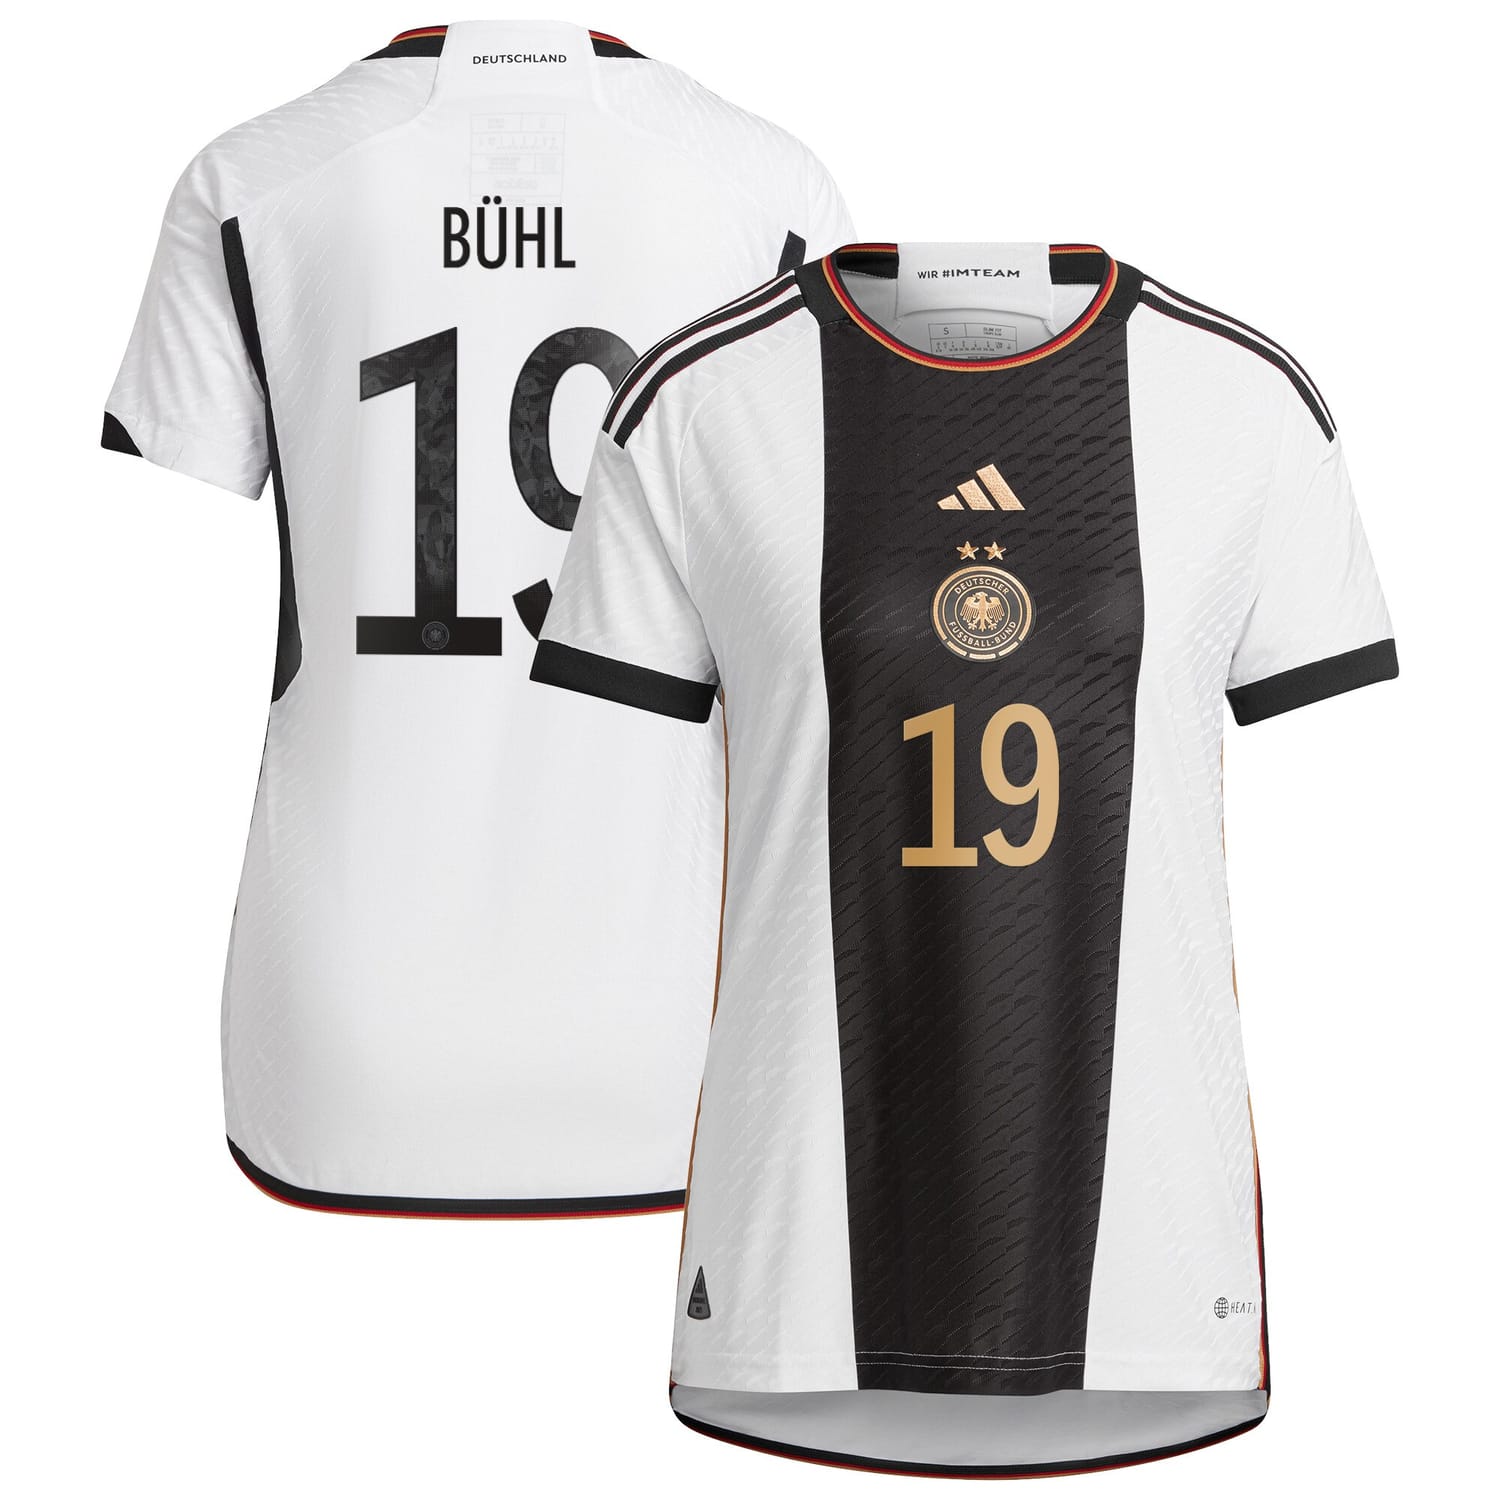 Germany National Team Home Authentic Jersey Shirt player Klara Bühl 19 printing for Women